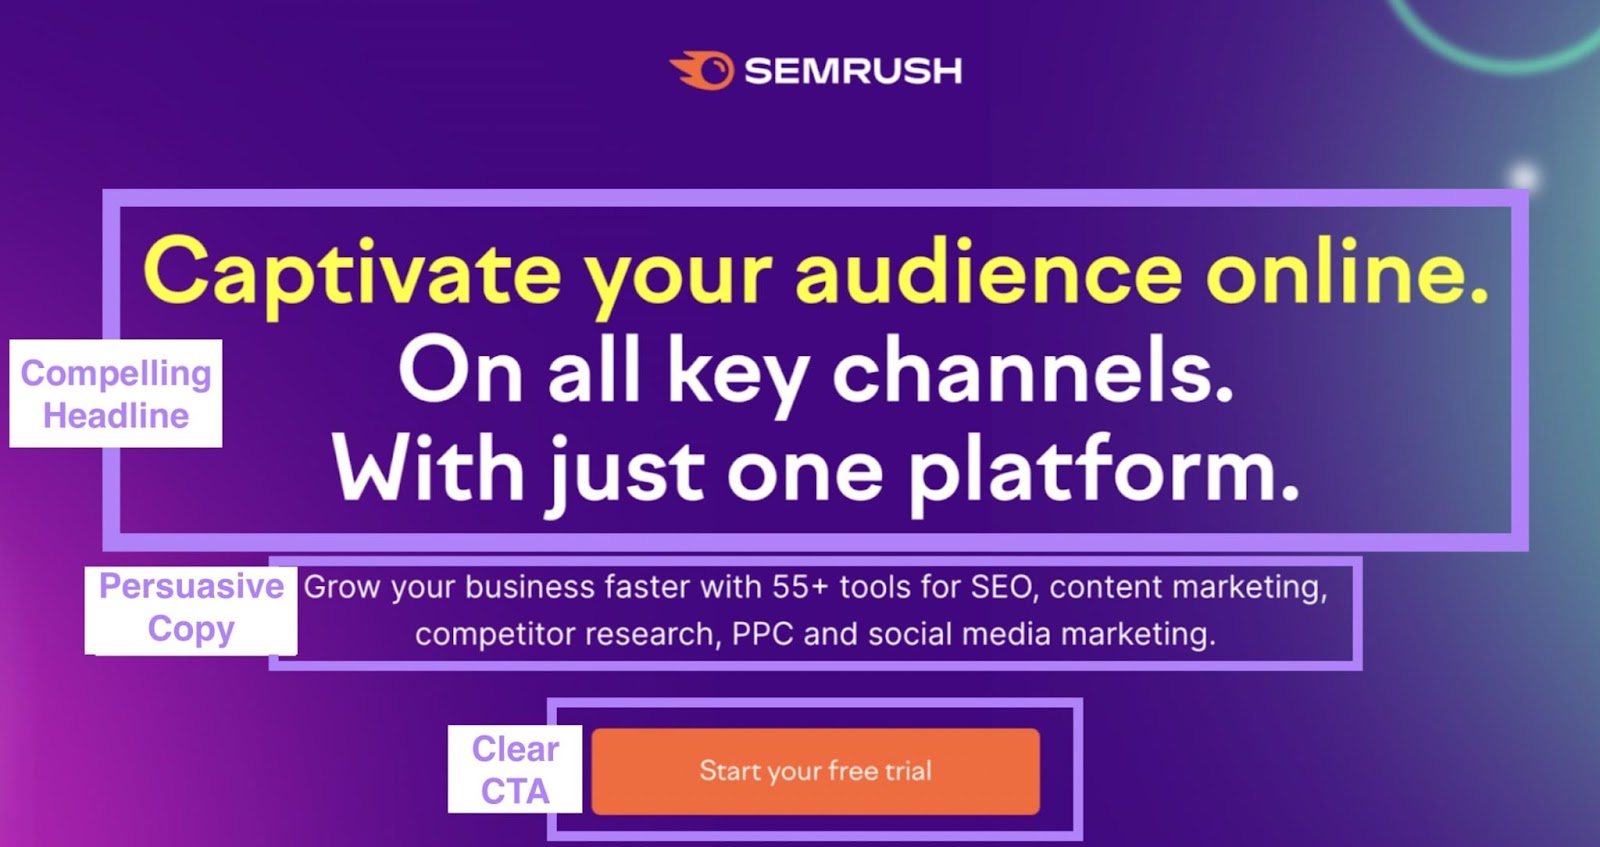 Semrush landing page with clear CTA, persuasive copy, and a compelling headline highlighted